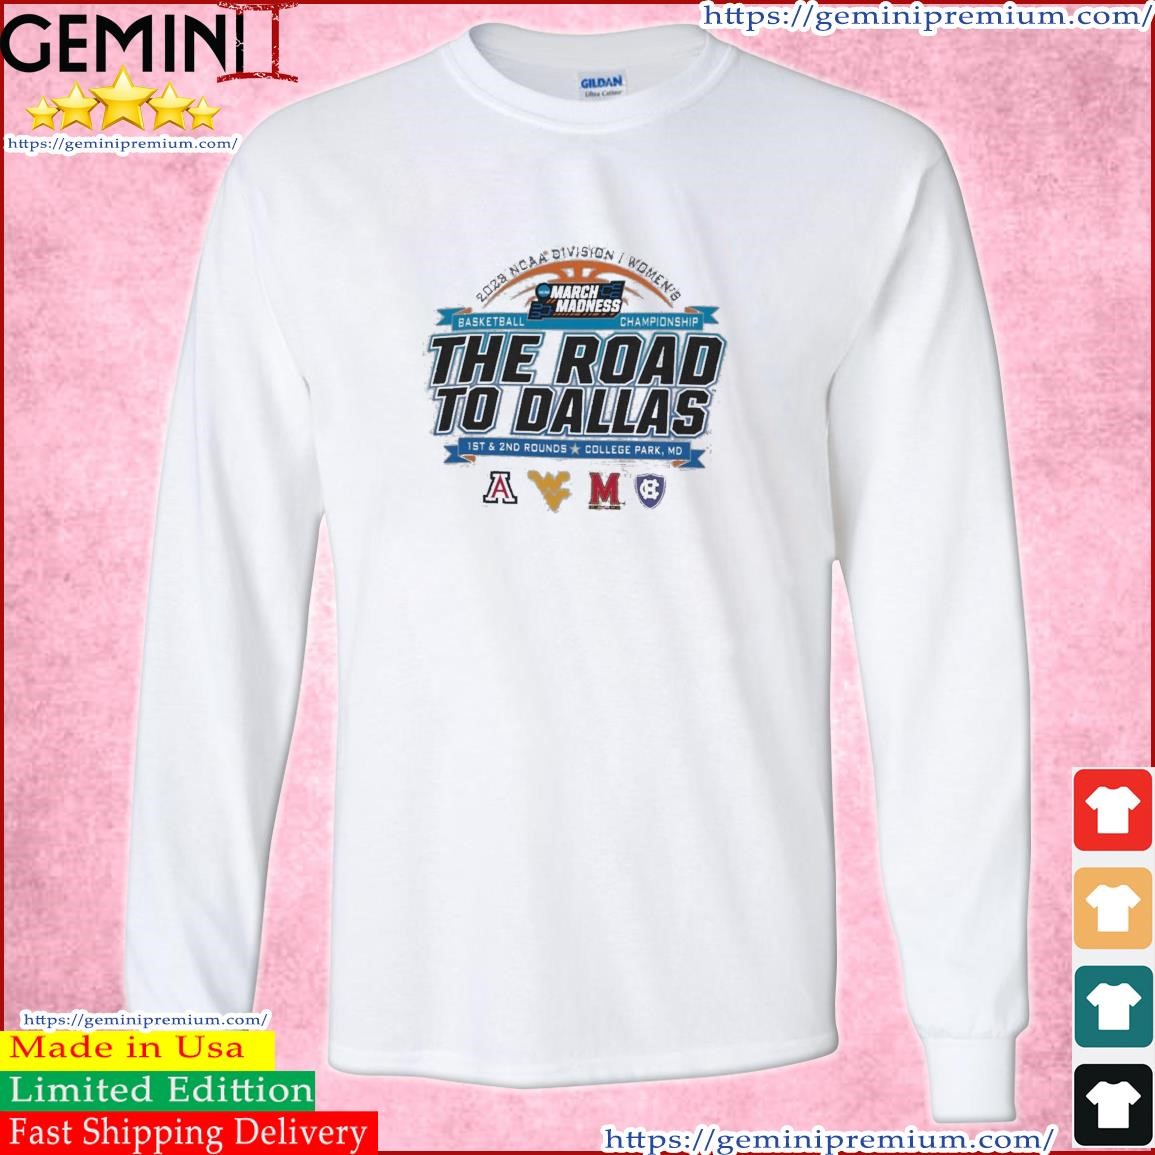 2023 NCAA Division I Women's Basketball The Road To Dallas March Madness 1st & 2nd Rounds College Park, MD Shirt Long Sleeve Tee.jpg